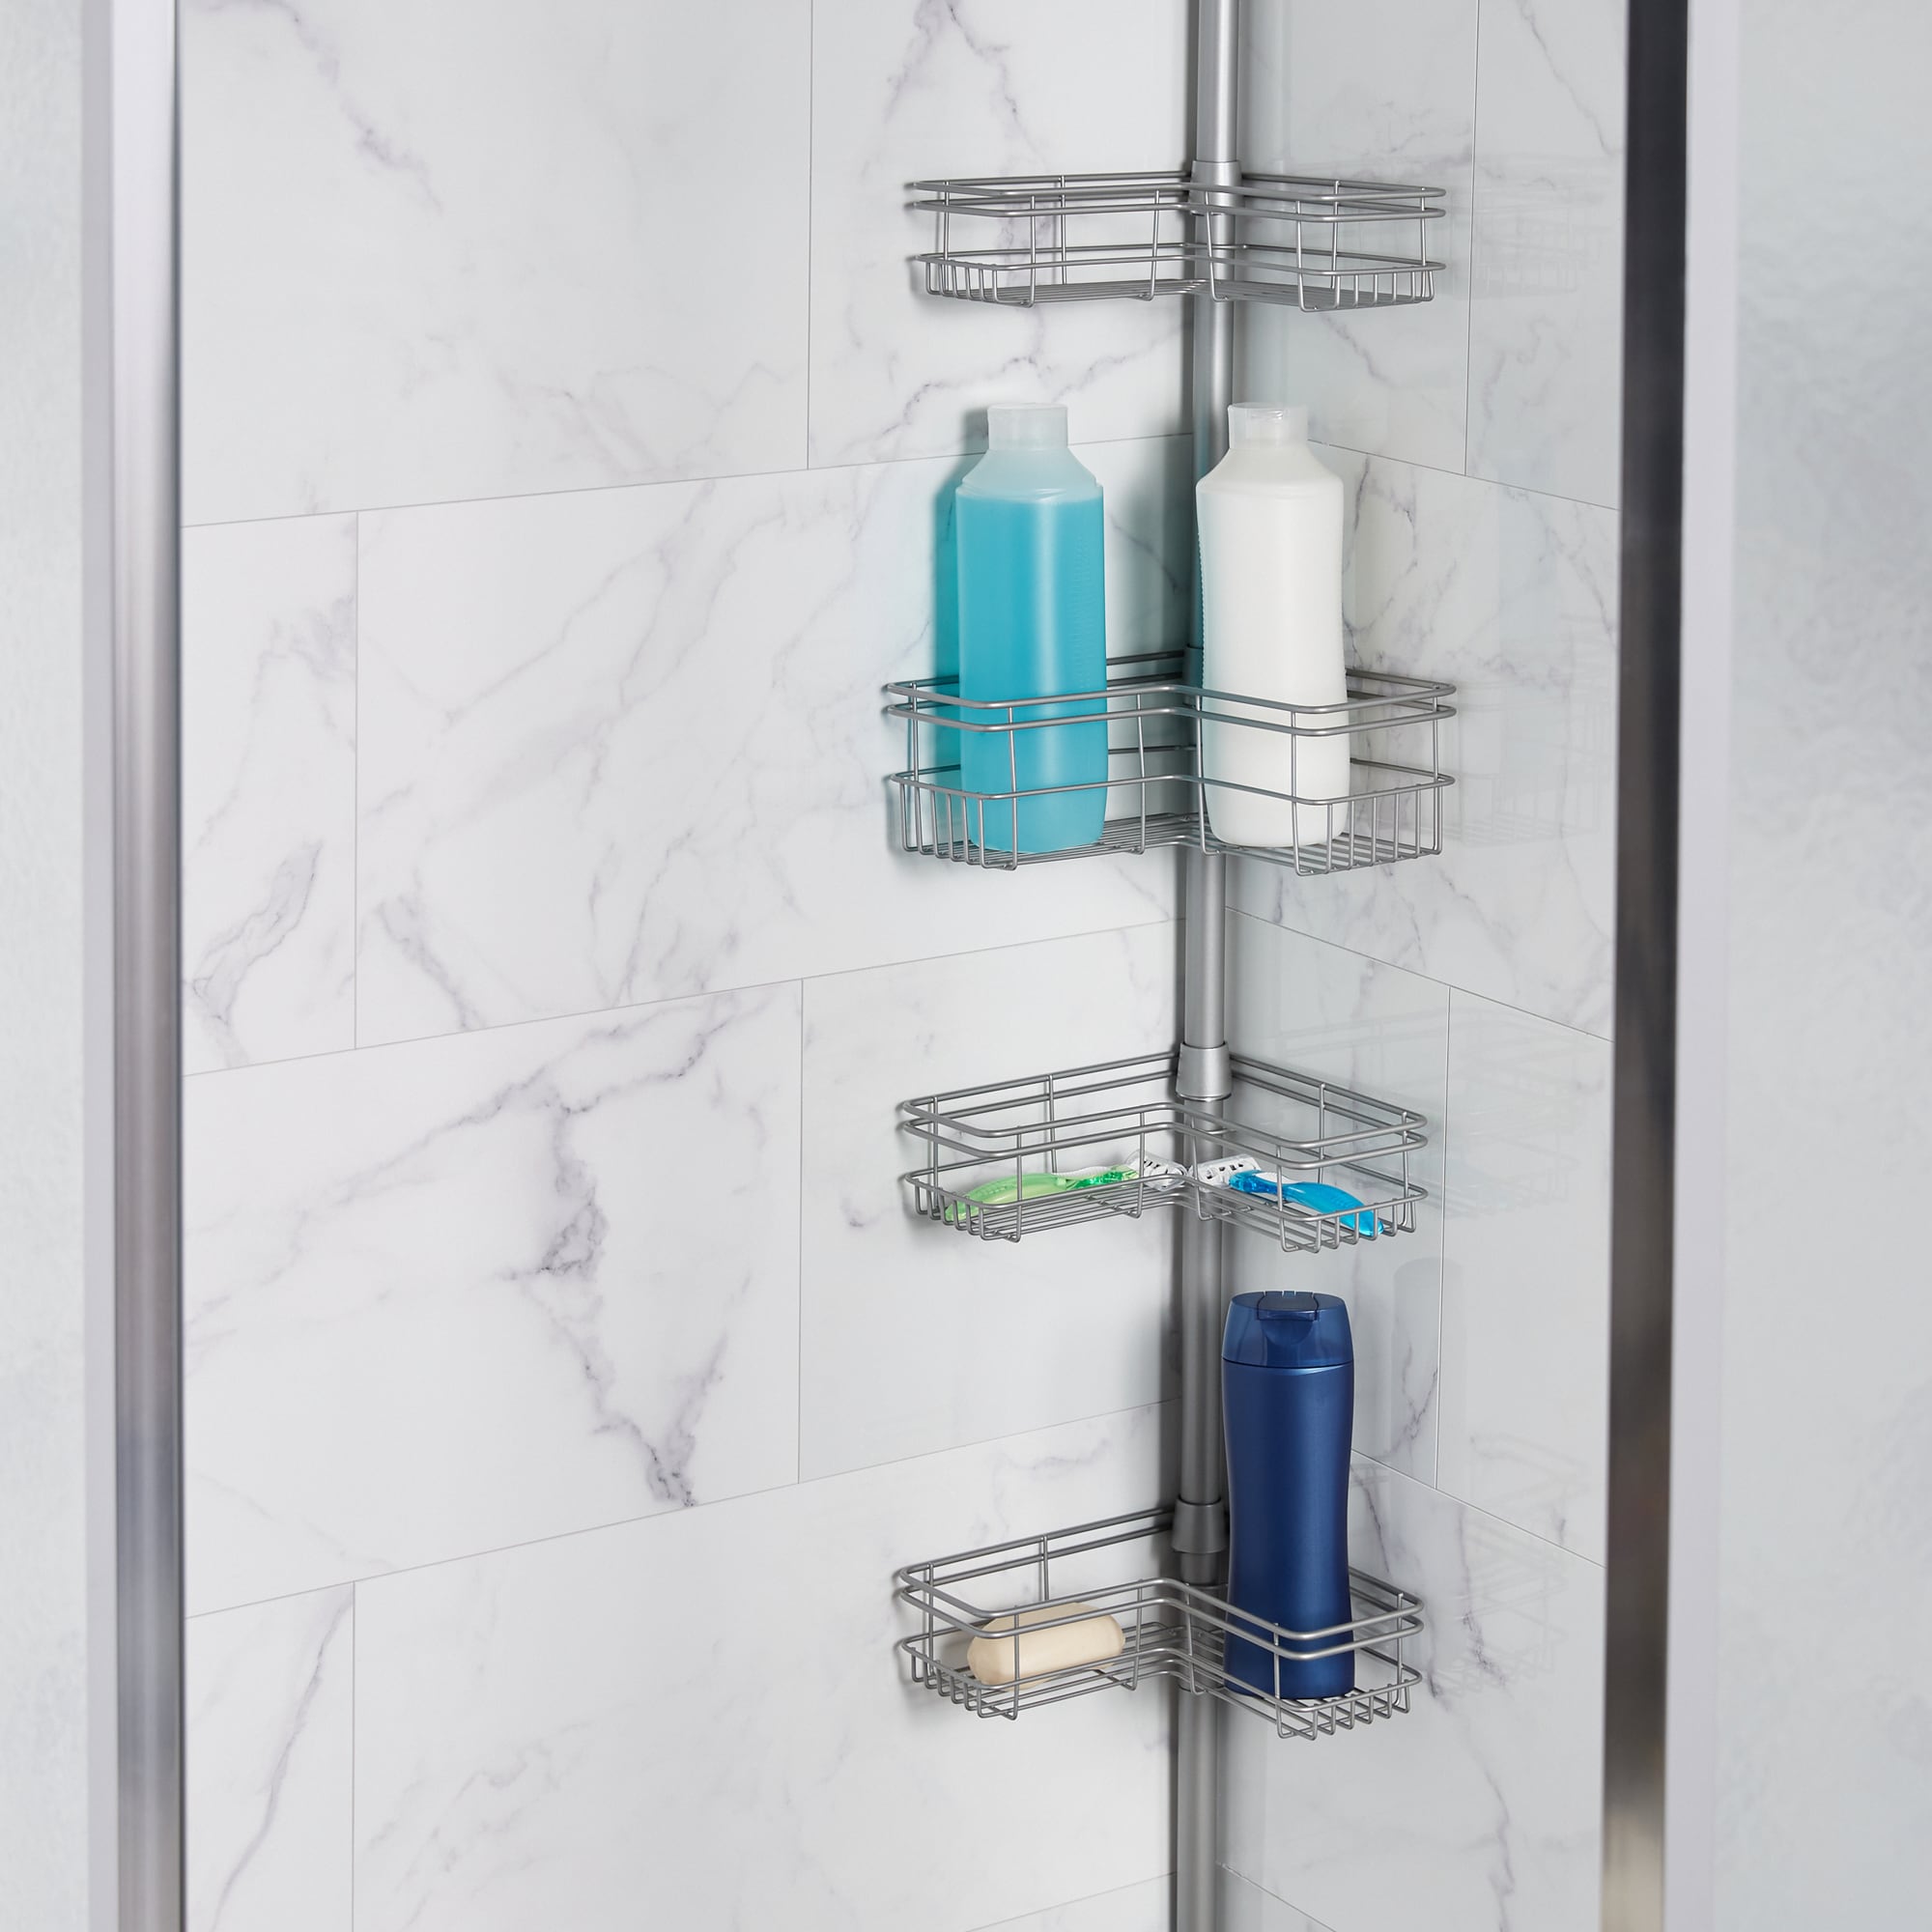 Zenith Products Tub and Shower Tension Pole Caddy 4 Shelf White